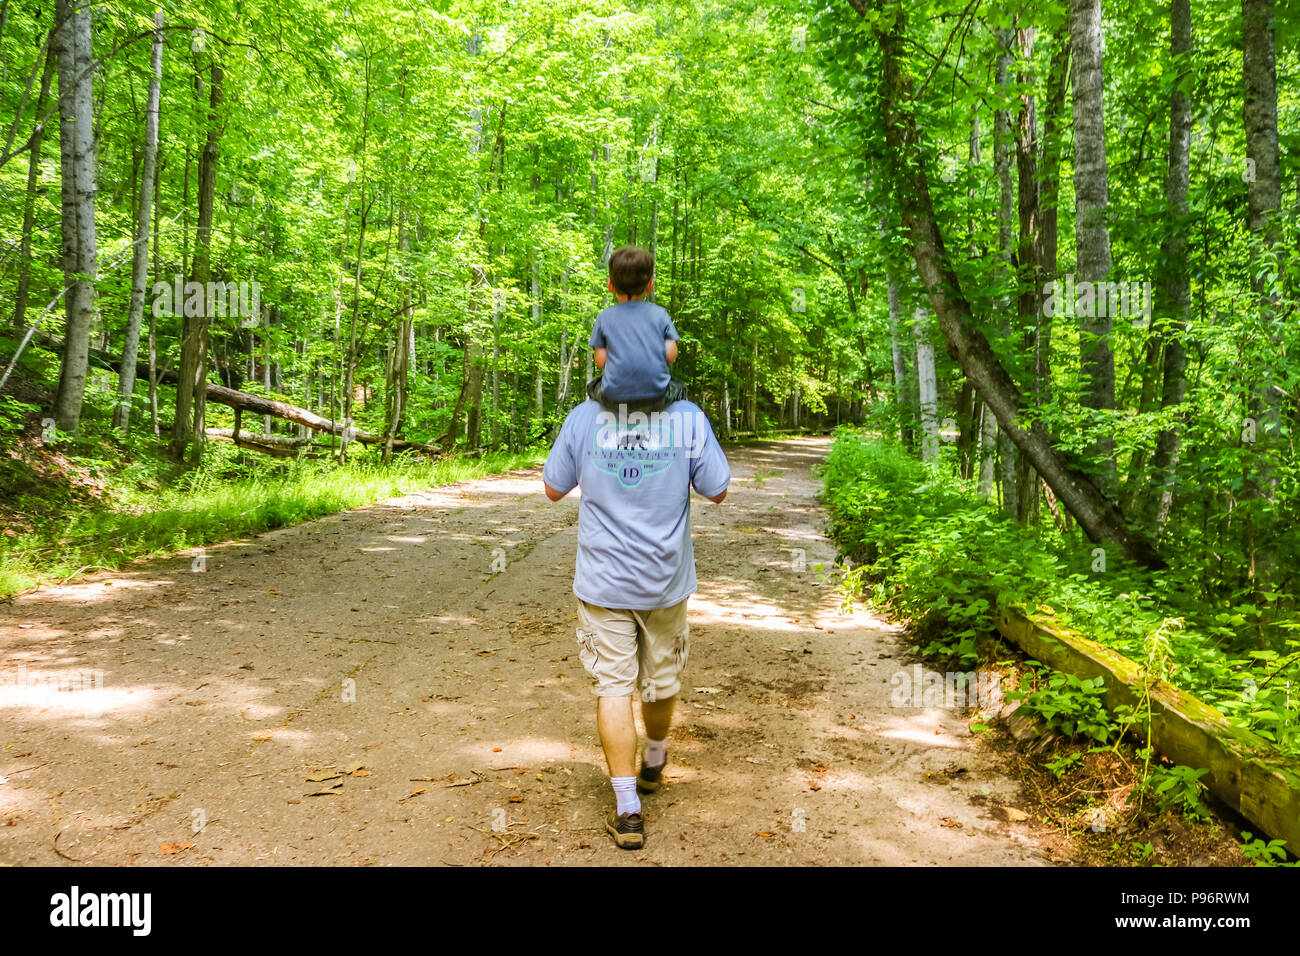 Grandfather and grandson walking together Stock Photo